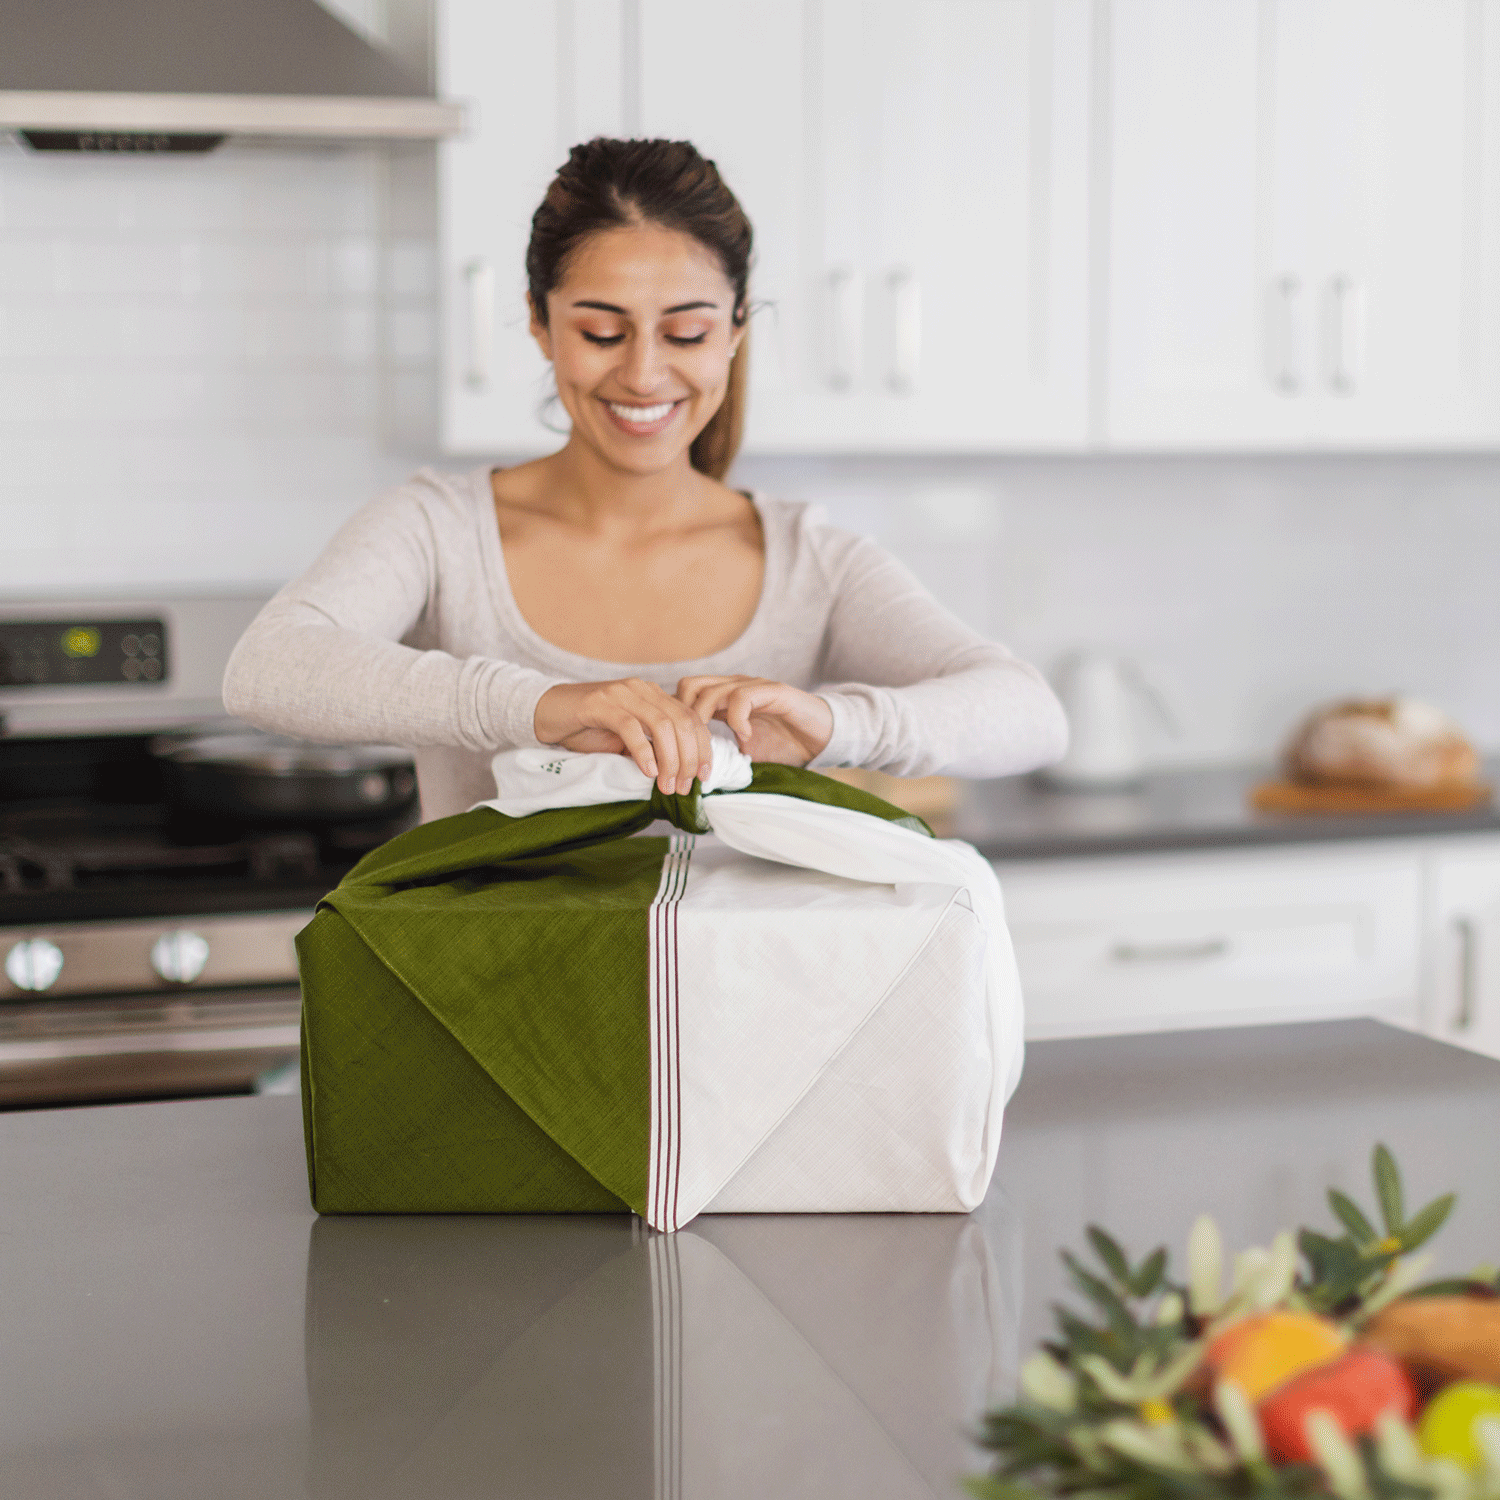 Matcha Maker Gift Starter Kit wrapped in furoshiki is being unwrapped.